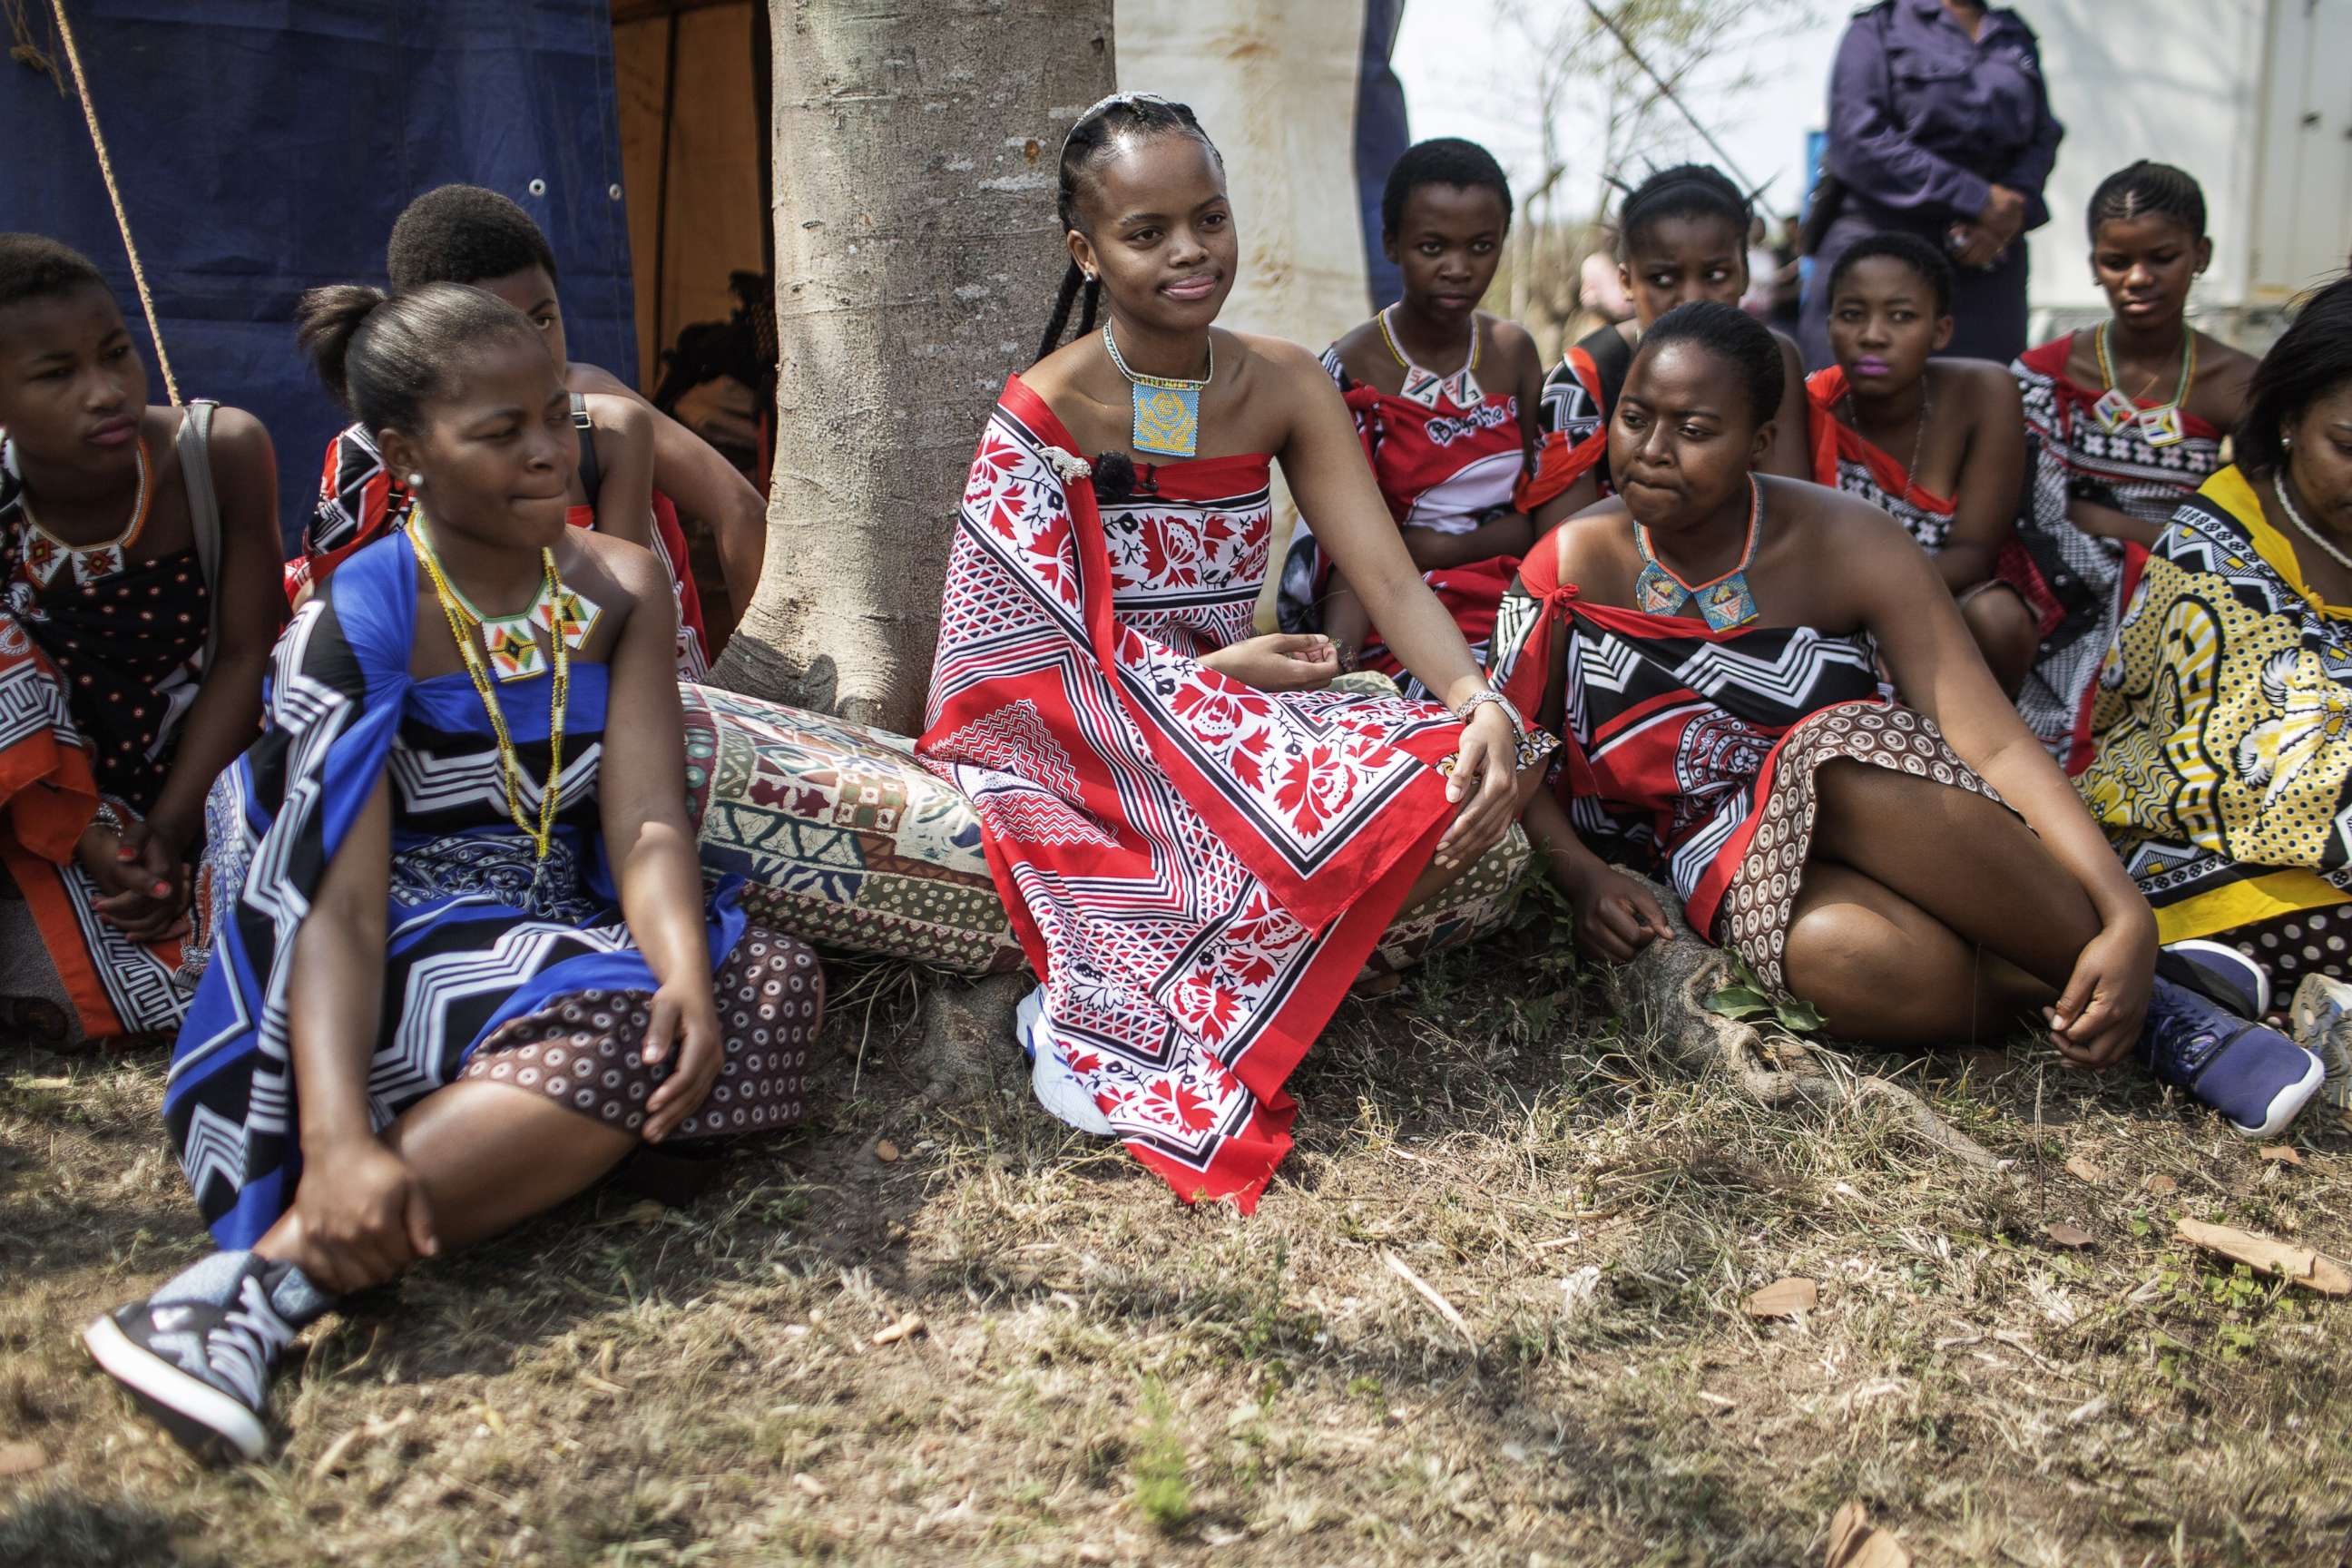 PHOTO: Her Royal Highness Princess Sikhanyiso Dlamini, the eldest daughter of the king of Eswatini, sits under a tree during an interview in Luve, Eswatini, Aug. 28, 2015.